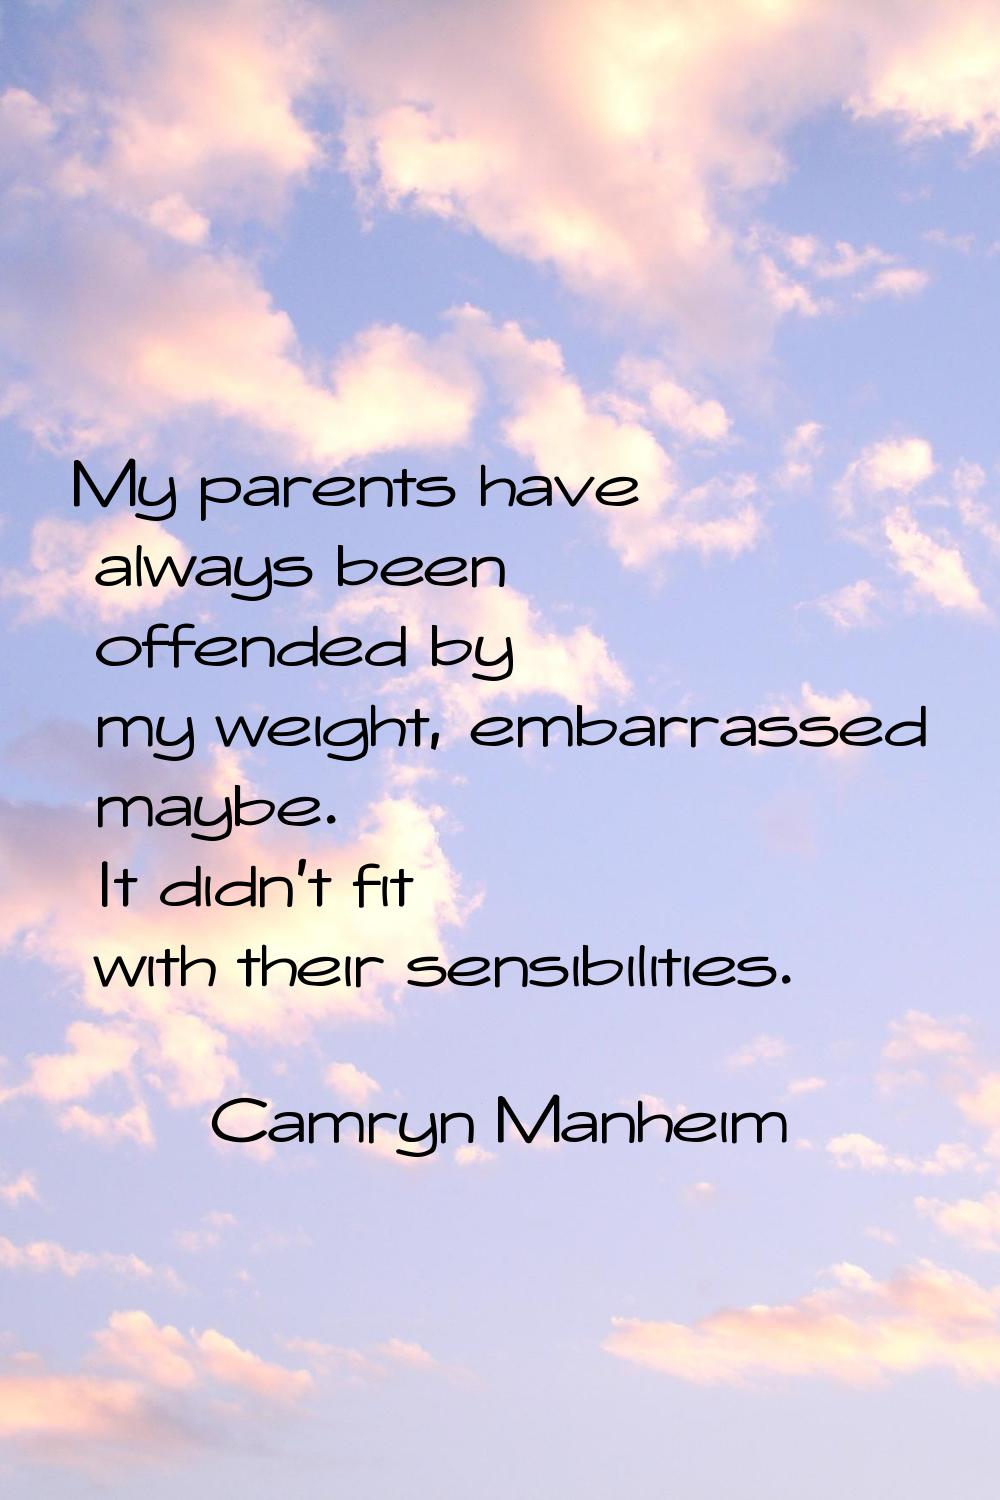 My parents have always been offended by my weight, embarrassed maybe. It didn't fit with their sens